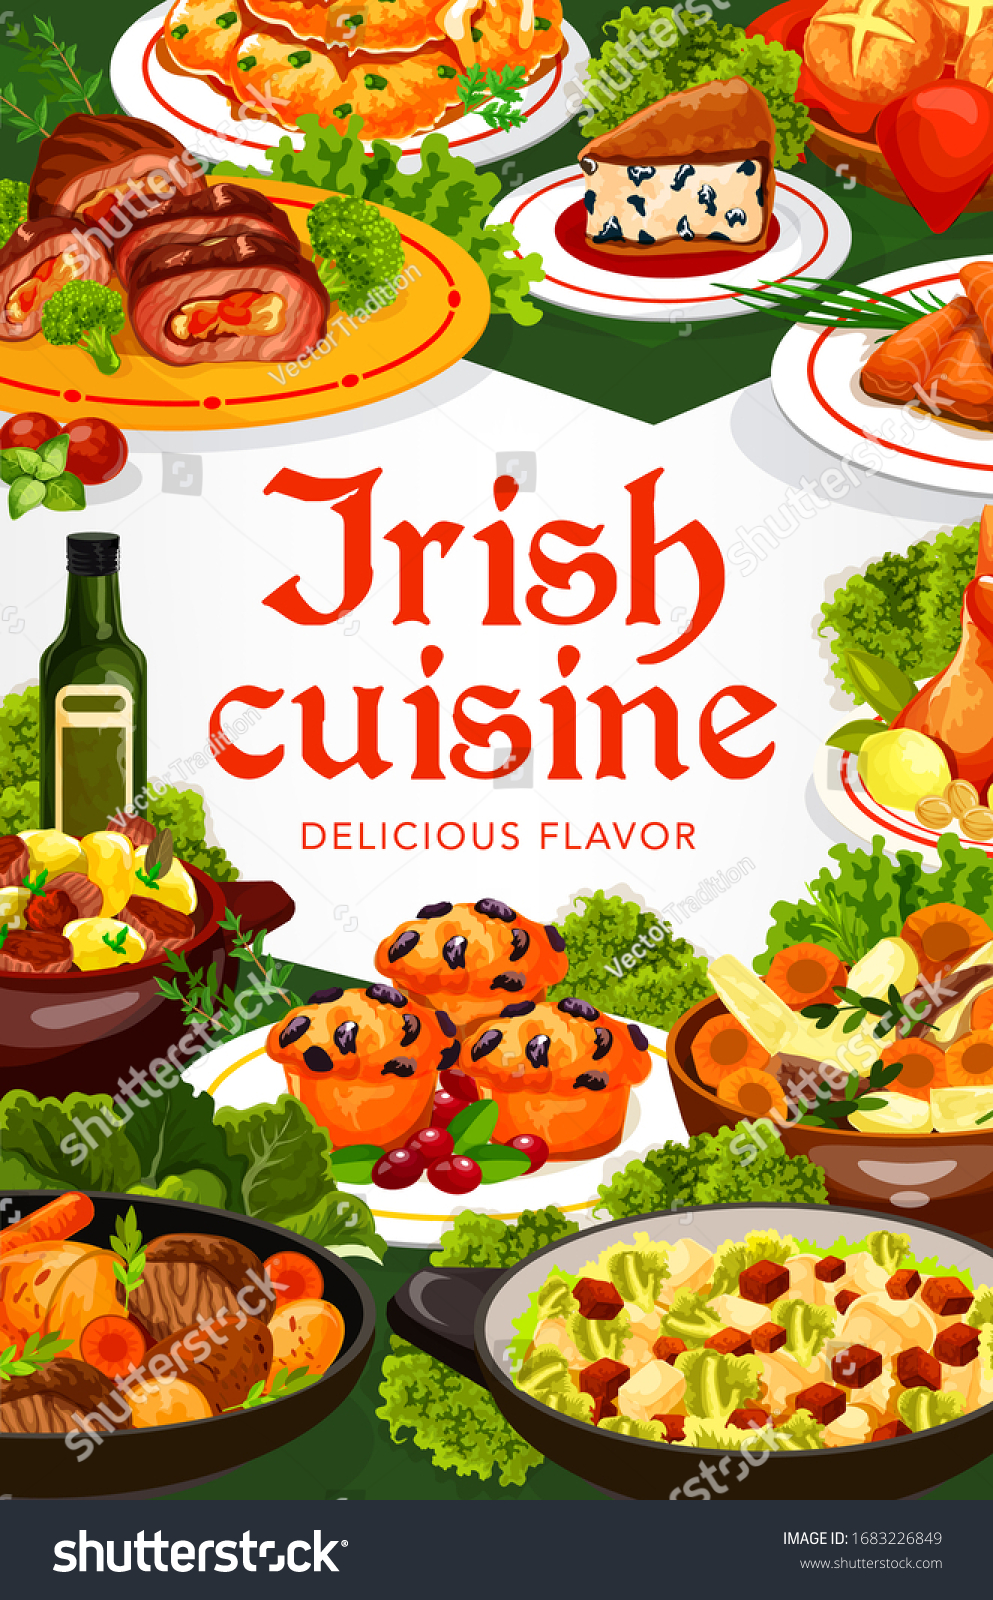 SVG of Irish cuisine vector dishes of meat, fish and vegetable food. Irish stews with beef, lamb and rabbit, potato pancakes and mashed colcannon, raisins bread, cabbage salad and cupcakes frame border svg